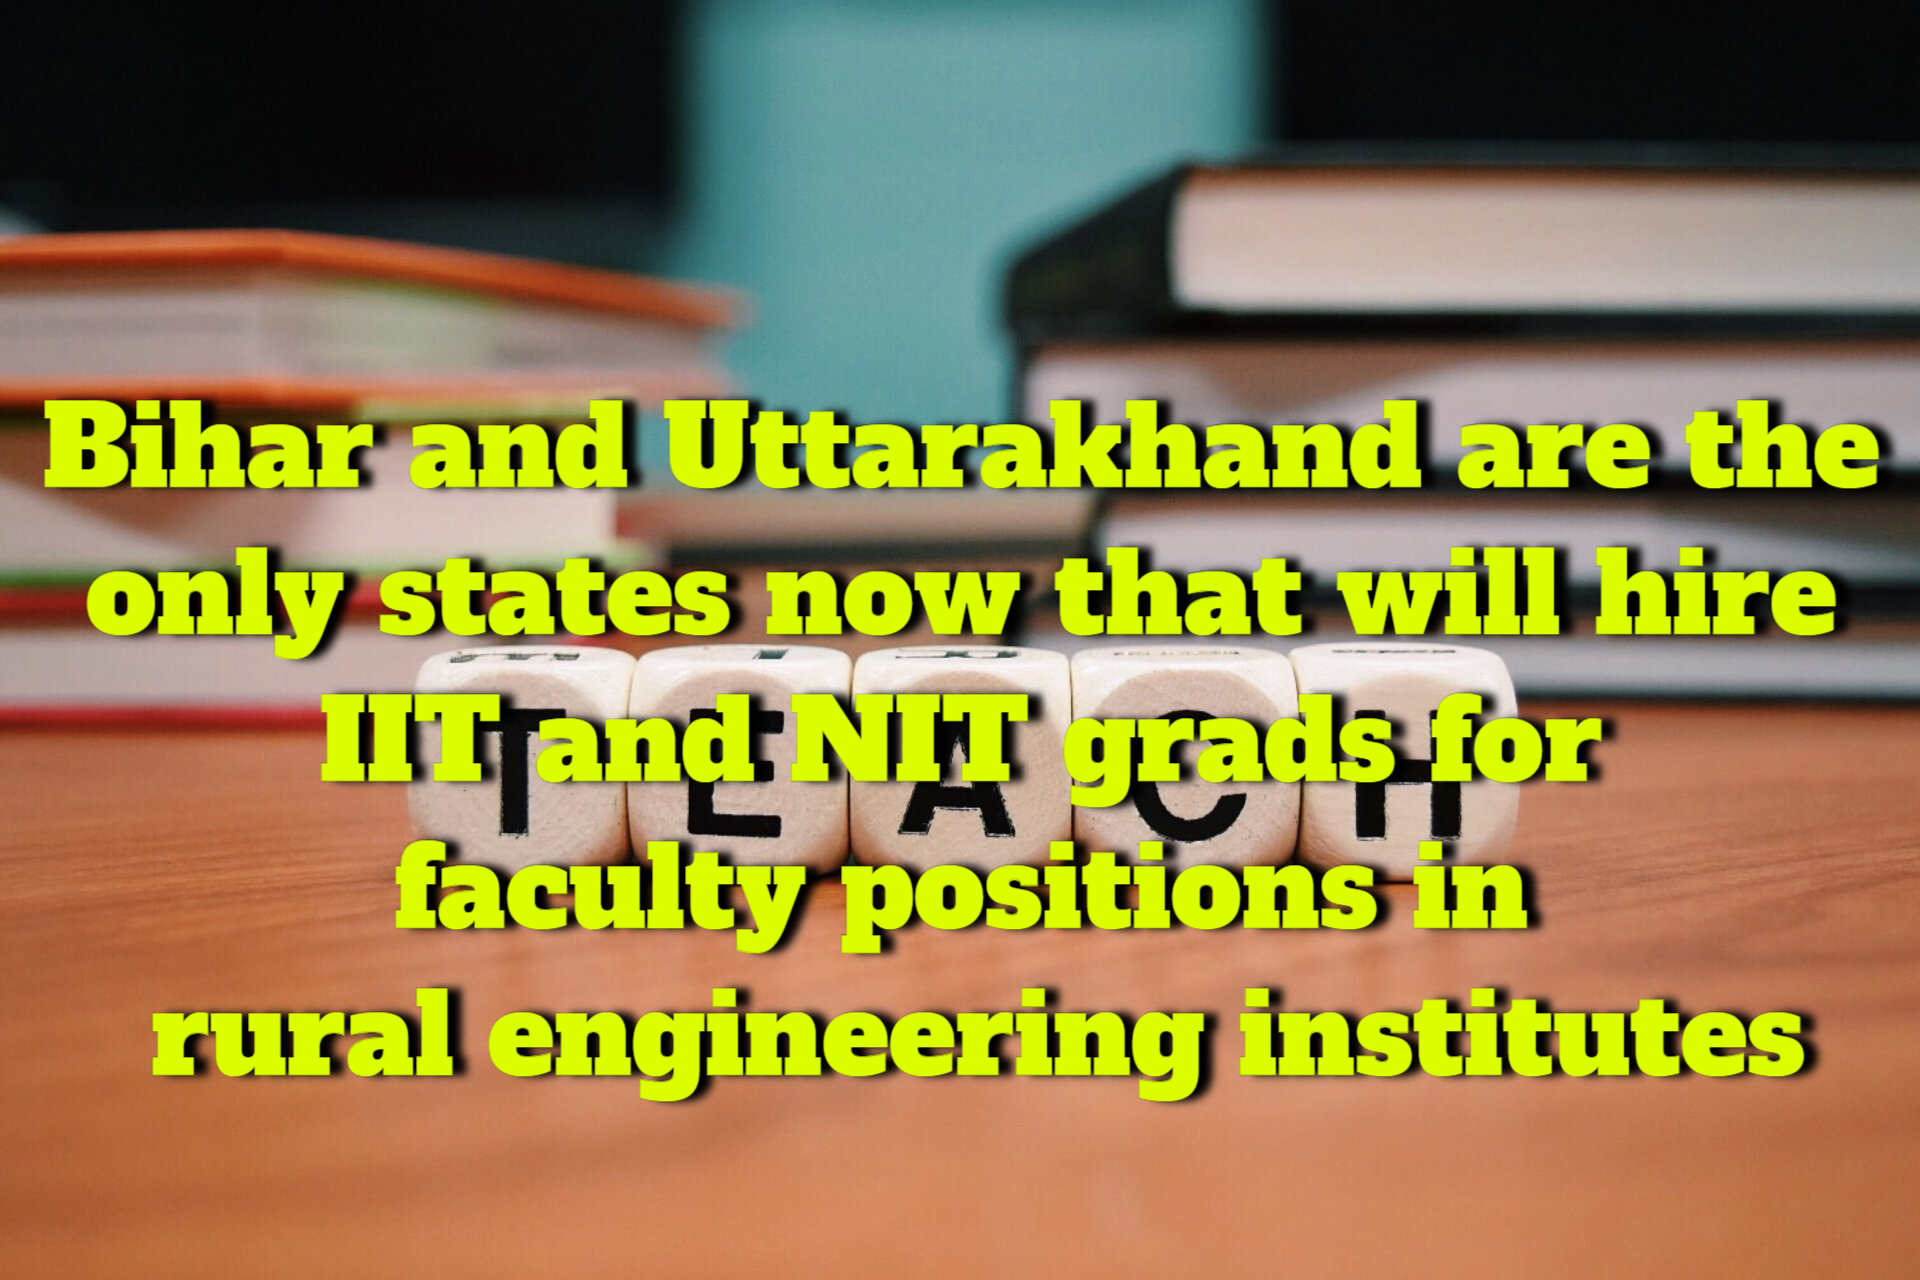 As for hiring IIT, NIT grads as faculty for rural engineering institutes, only Bihar and Uttarakhand will accept them